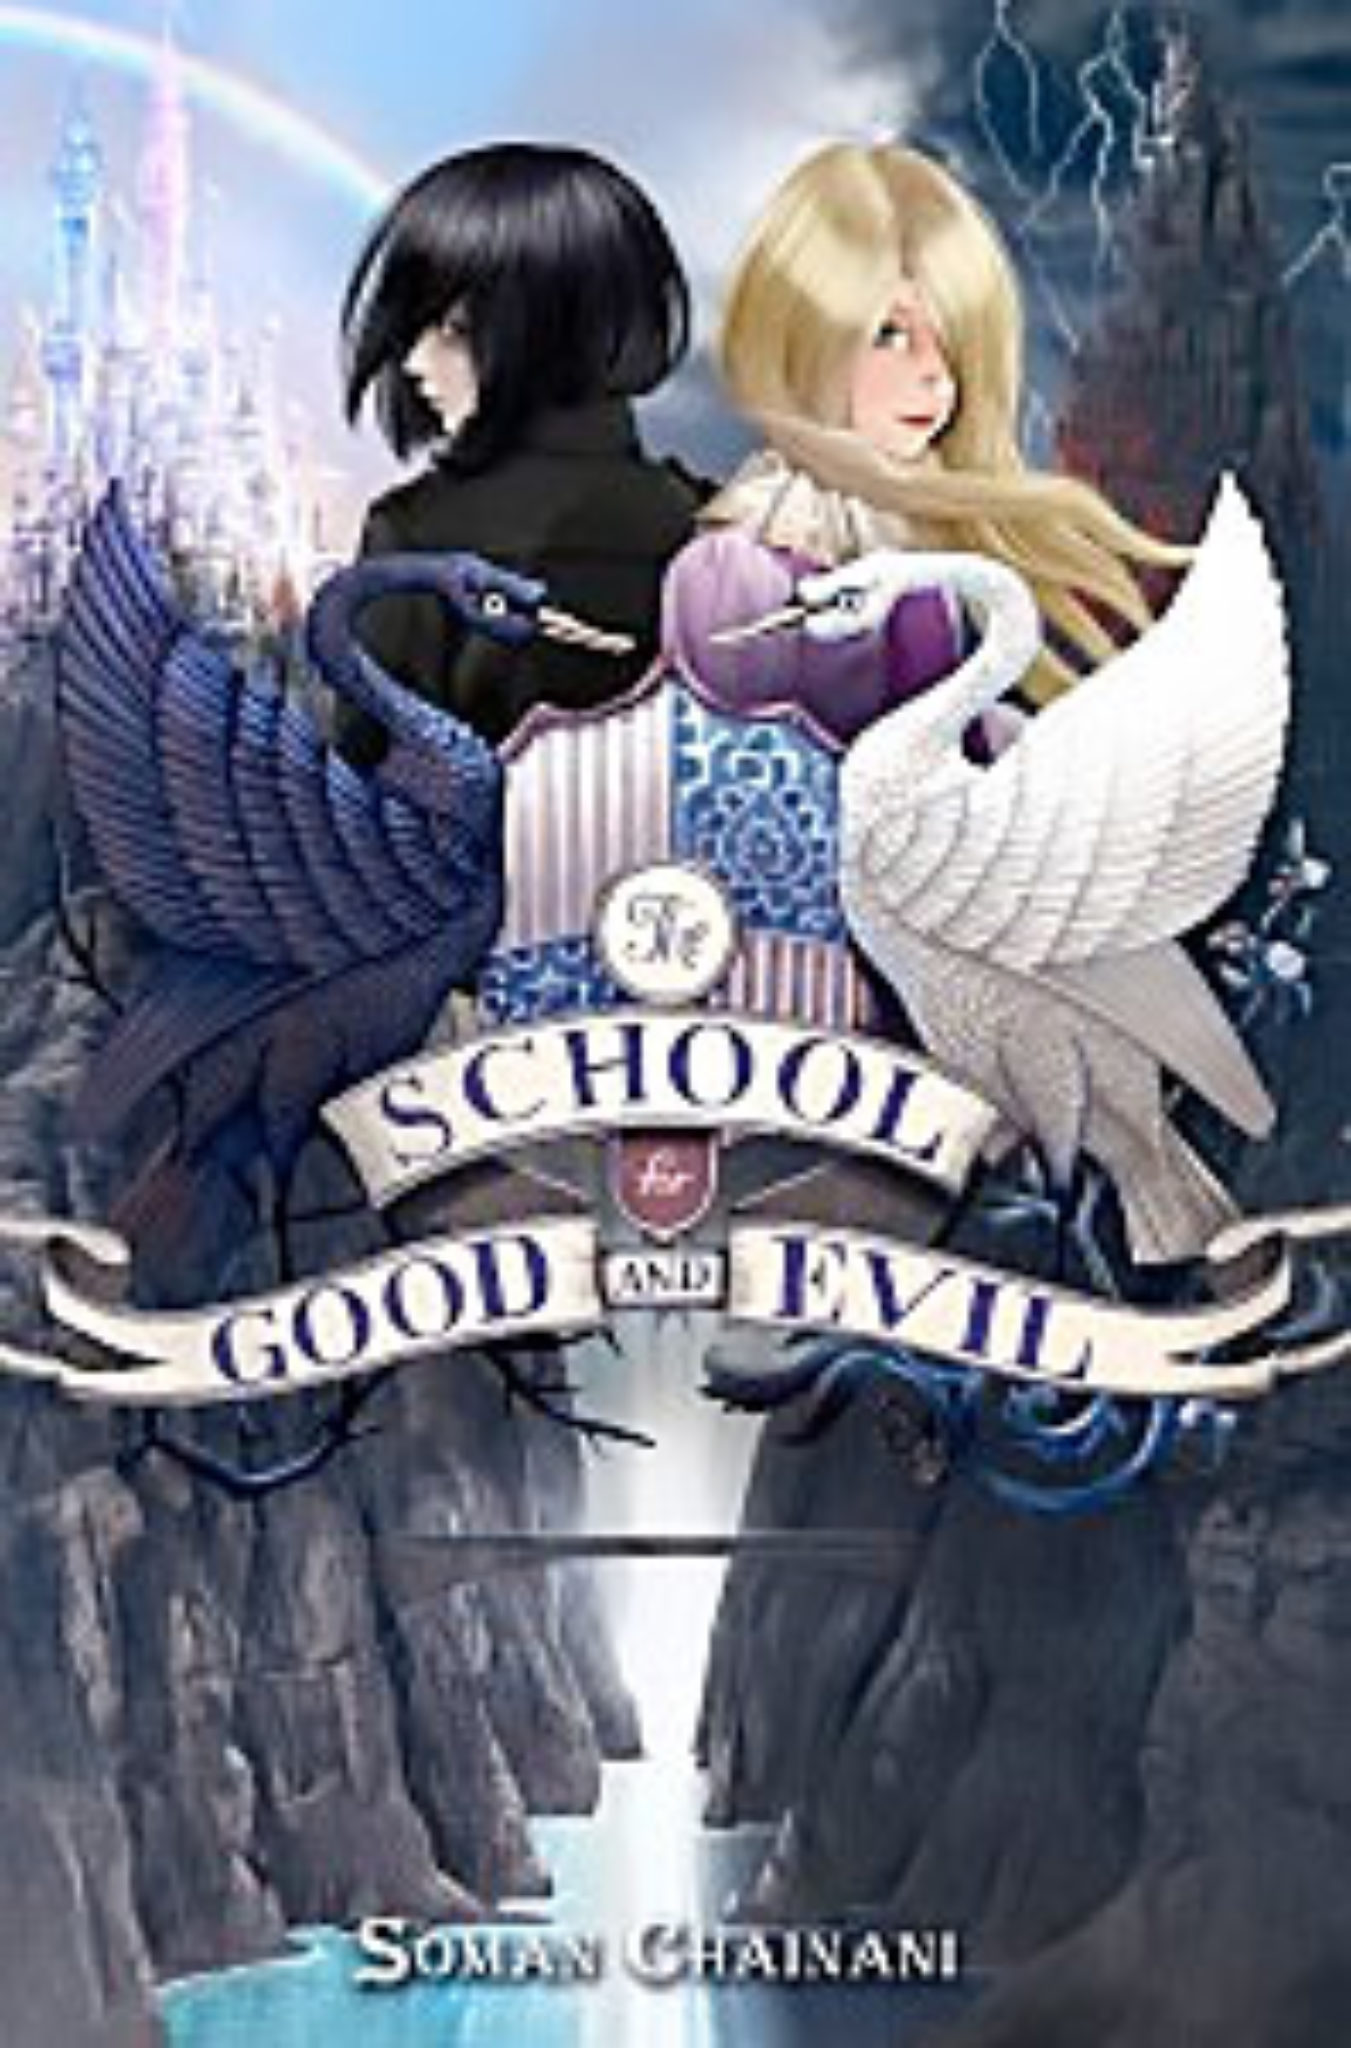 essay about the school for good and evil